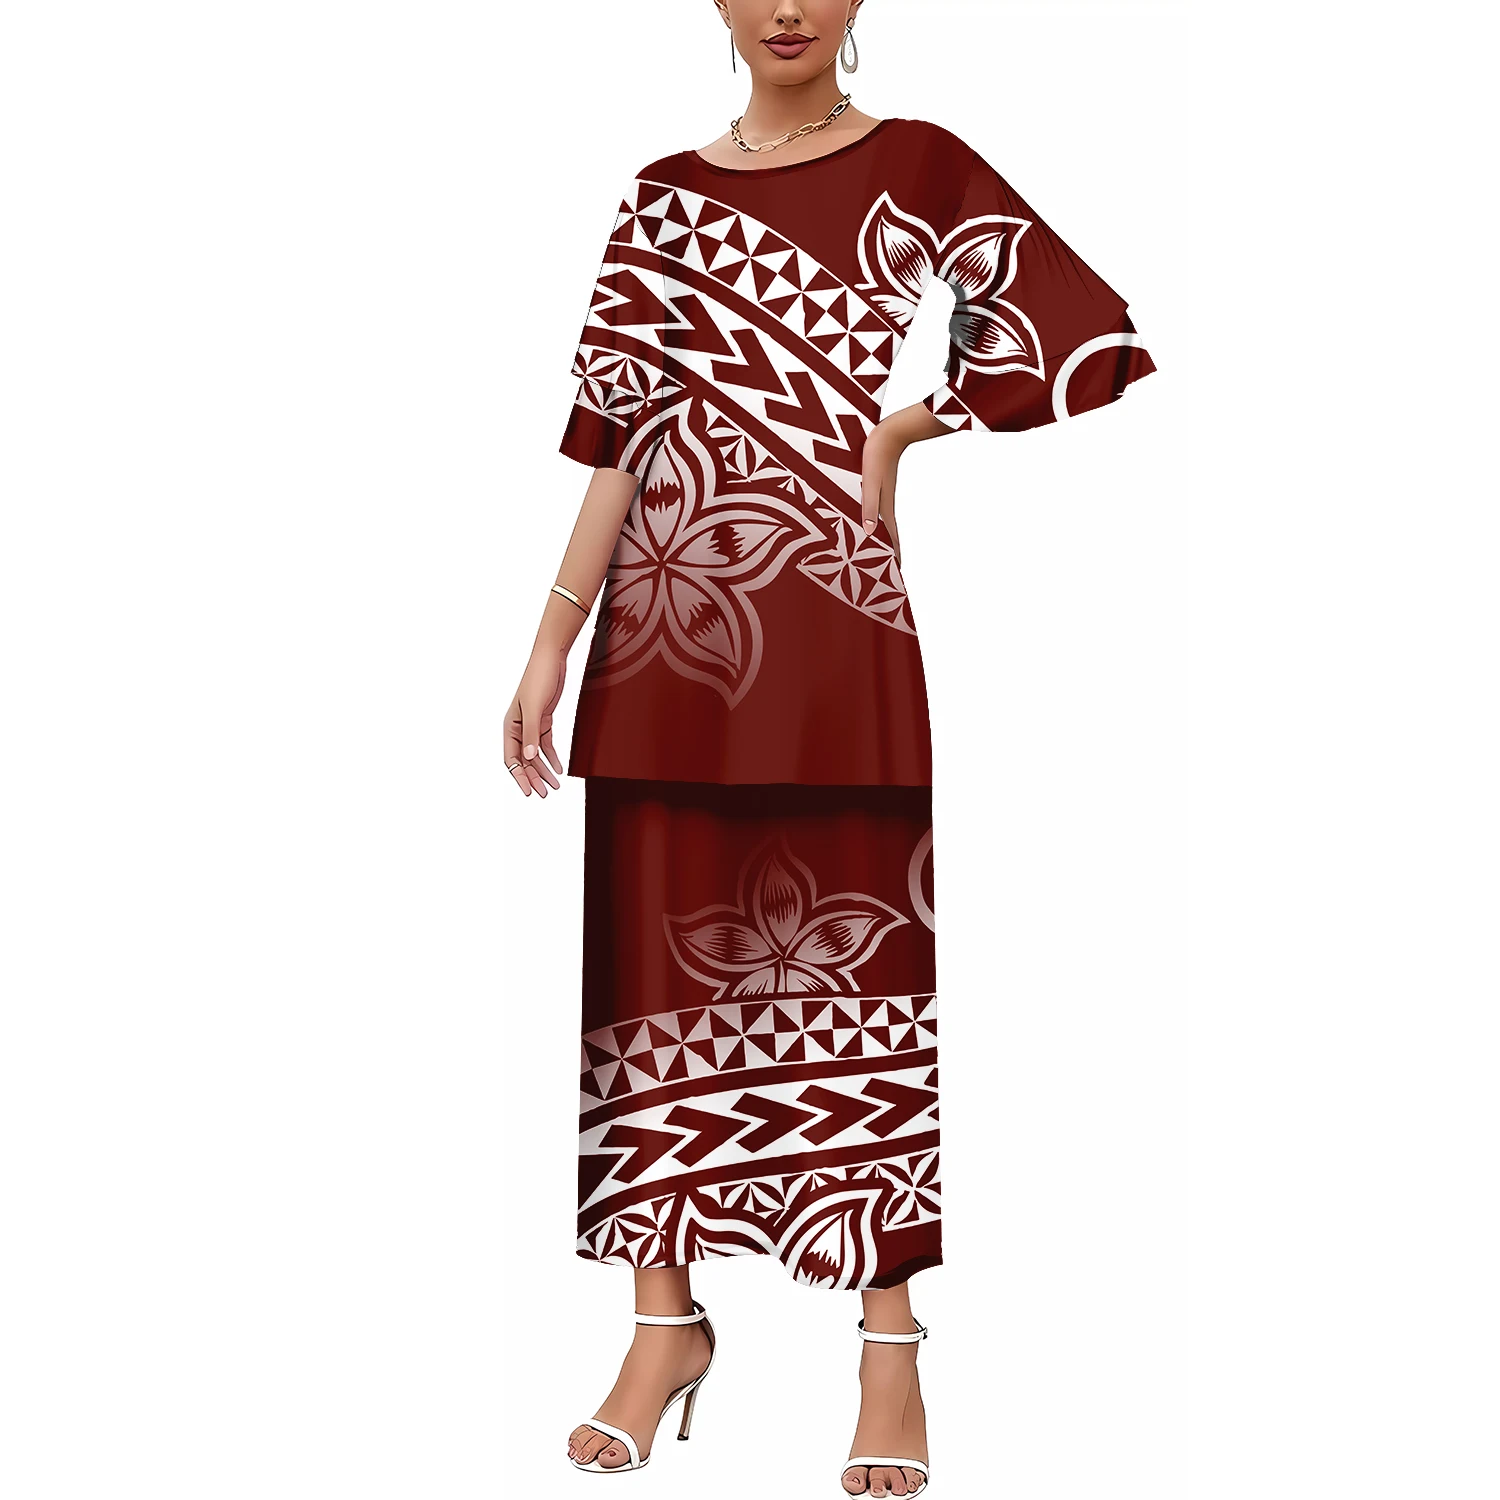 

Factory Outlet Customized On Demand Polynesian Hawaii Tribal High Quality Formal Occasions Puletasi Two Piece Drop Shipping